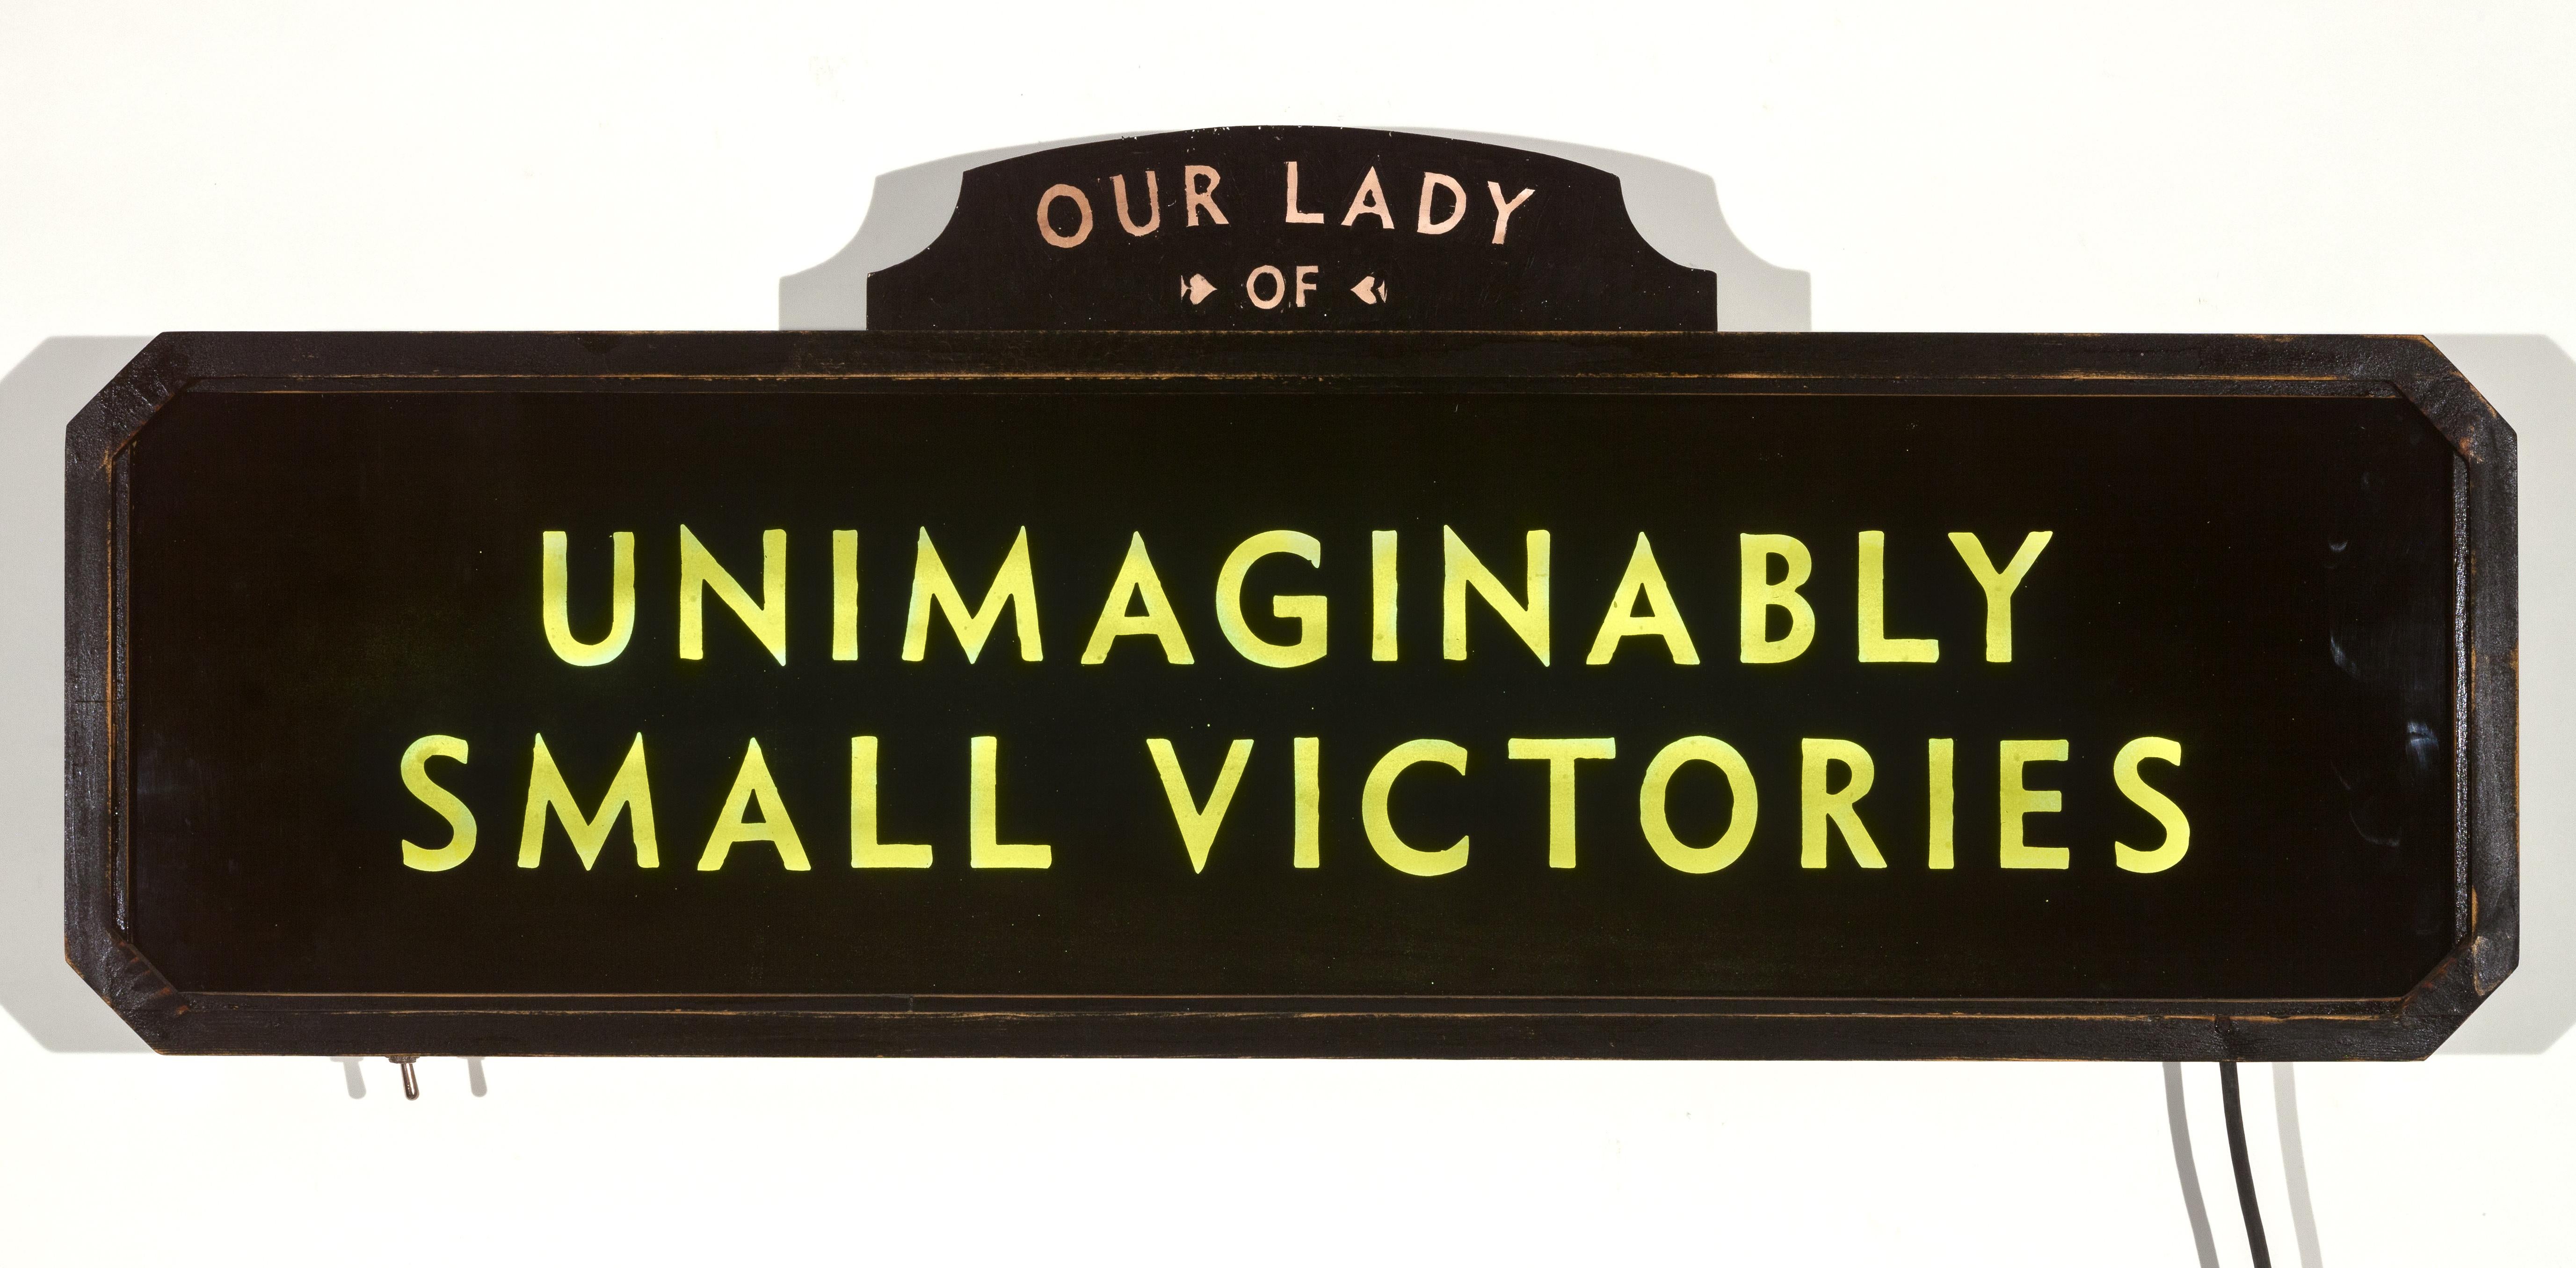 Our Lady of Unimaginably Small Victories (lighted sign) - Mixed Media Art by Skylar Fein